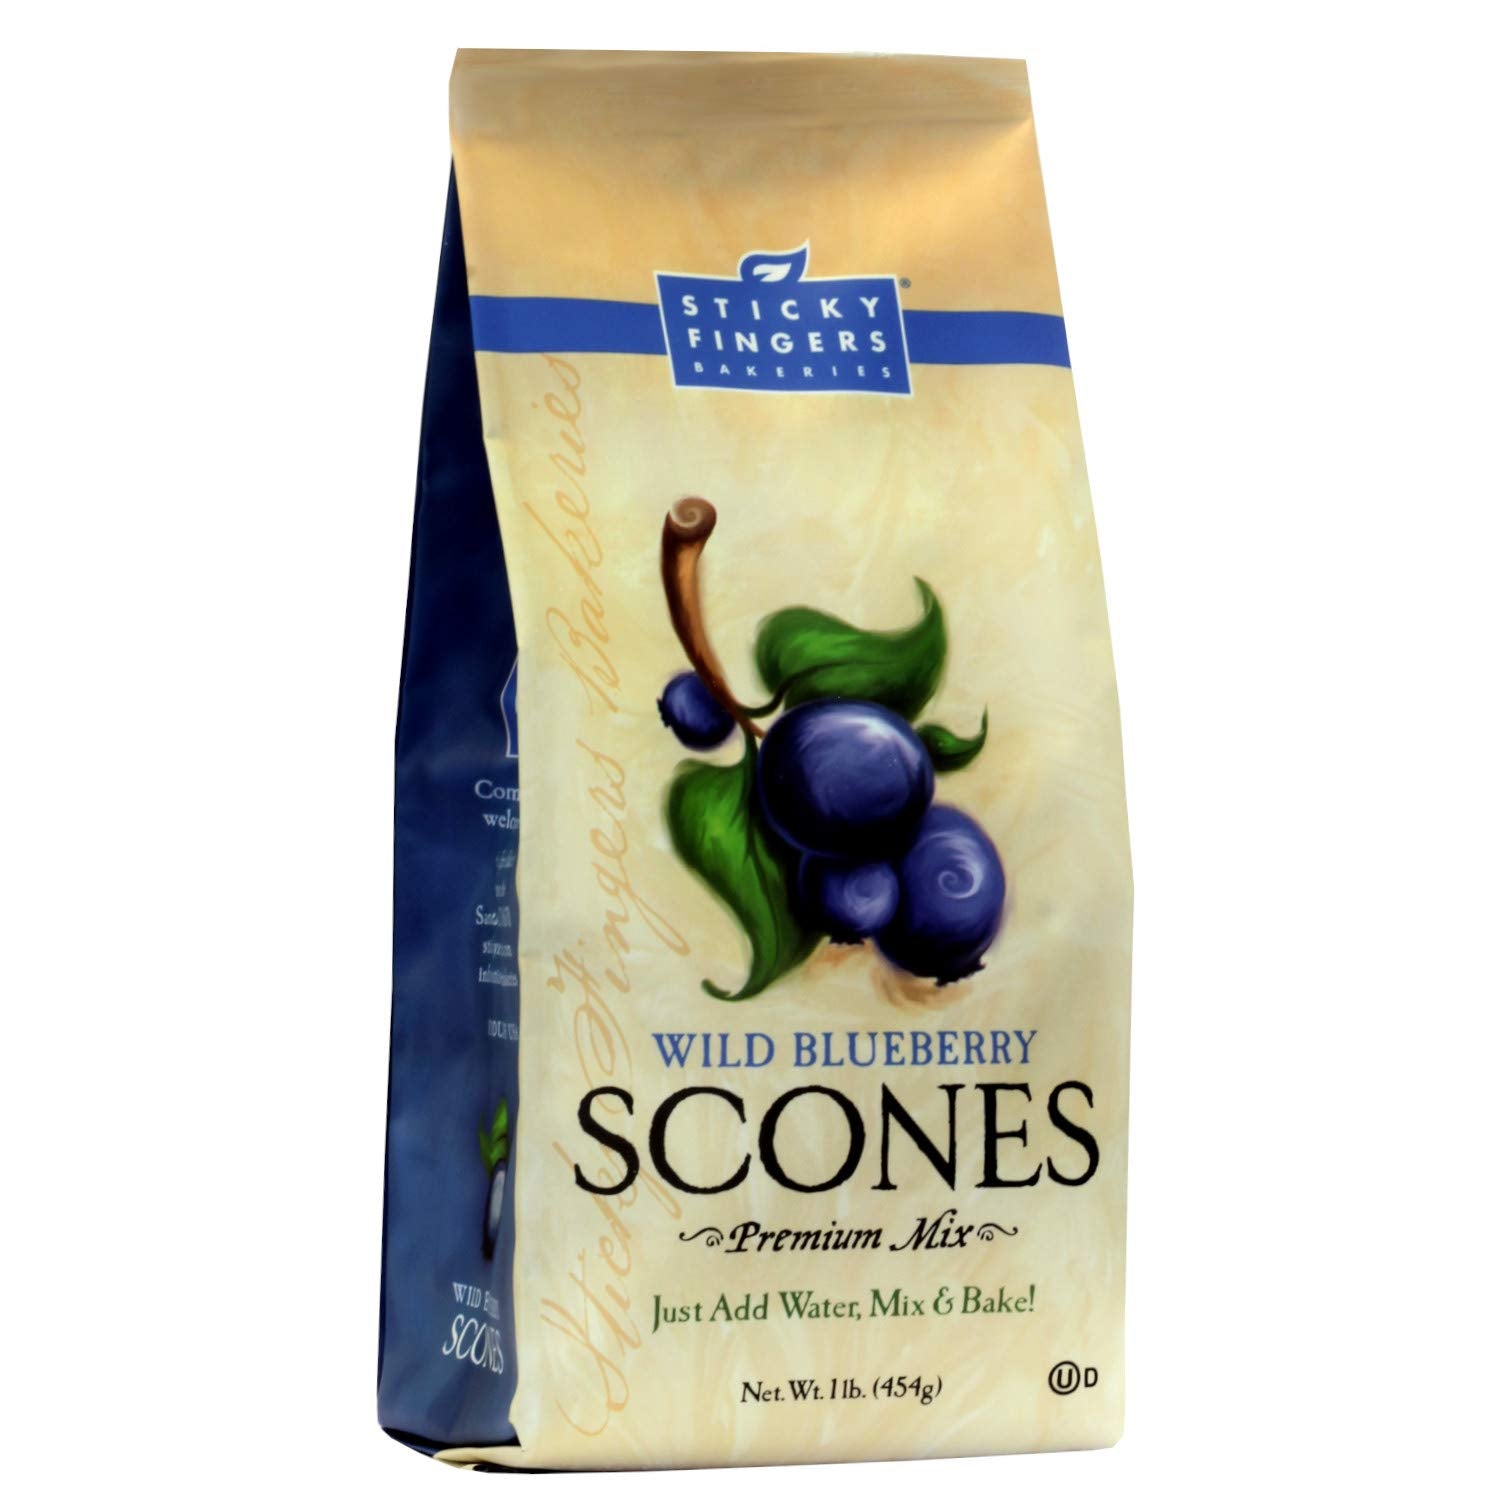 English Scone Mix, Wild Blueberry by Sticky Fingers Bakeries – Easy to Make English Scones Fresh Baked, Makes 12 Scones (1pk)